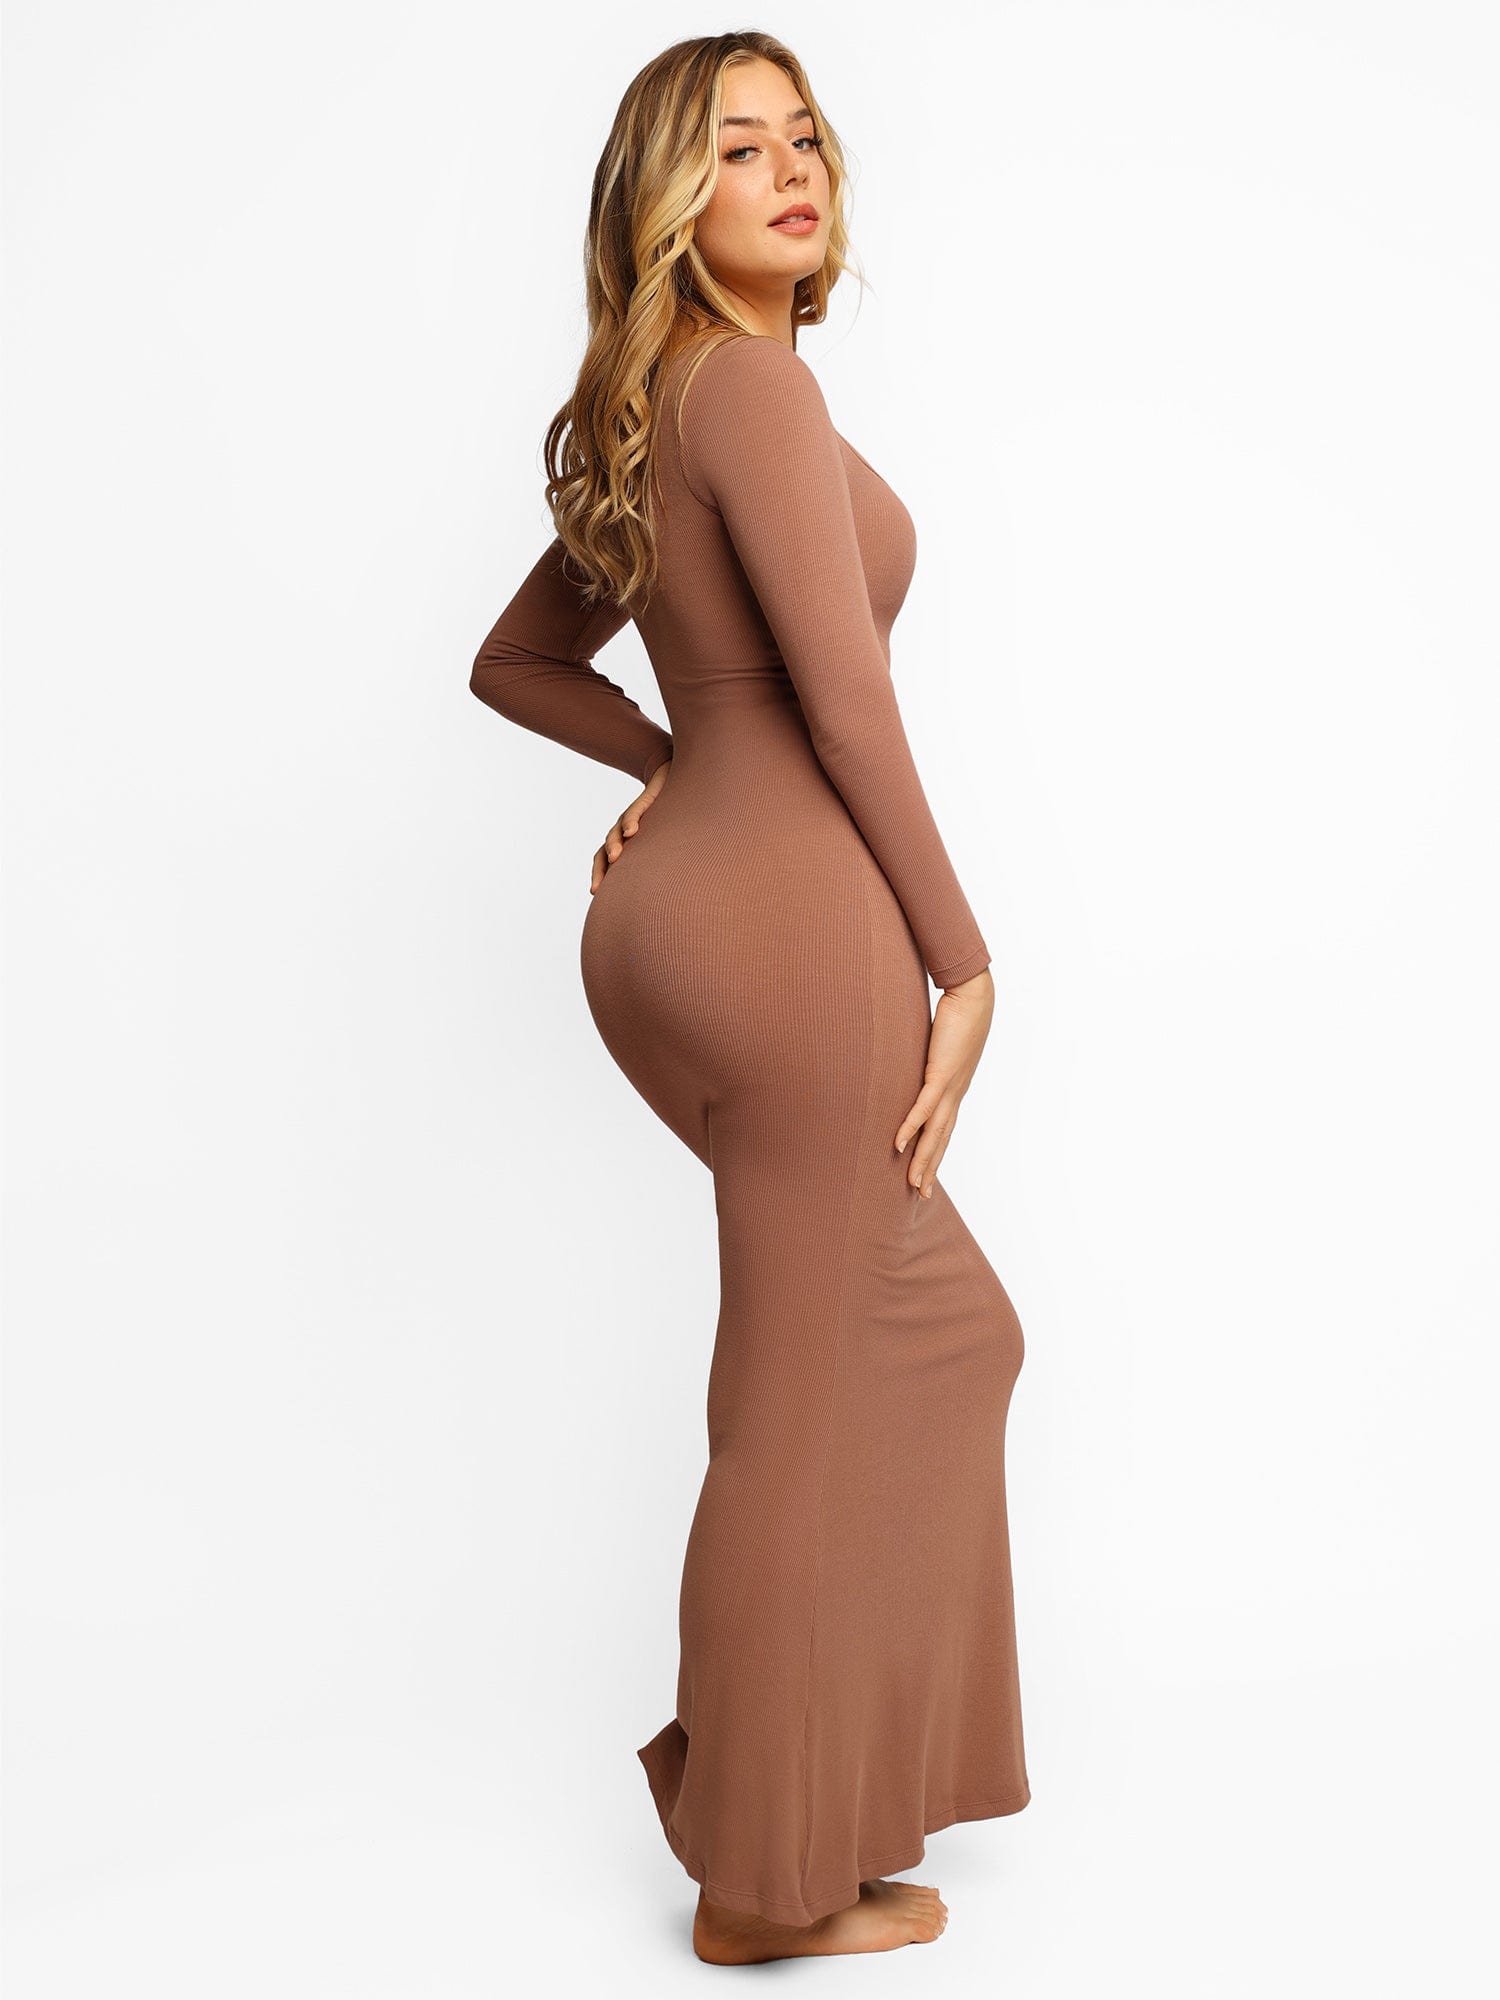  Kithol Browsluv Built-in Shapewear Lounge Dress, Dress Built in  Shapewear Bra, Shaper Dress Mini Slit Built in Shapewear : Clothing, Shoes  & Jewelry